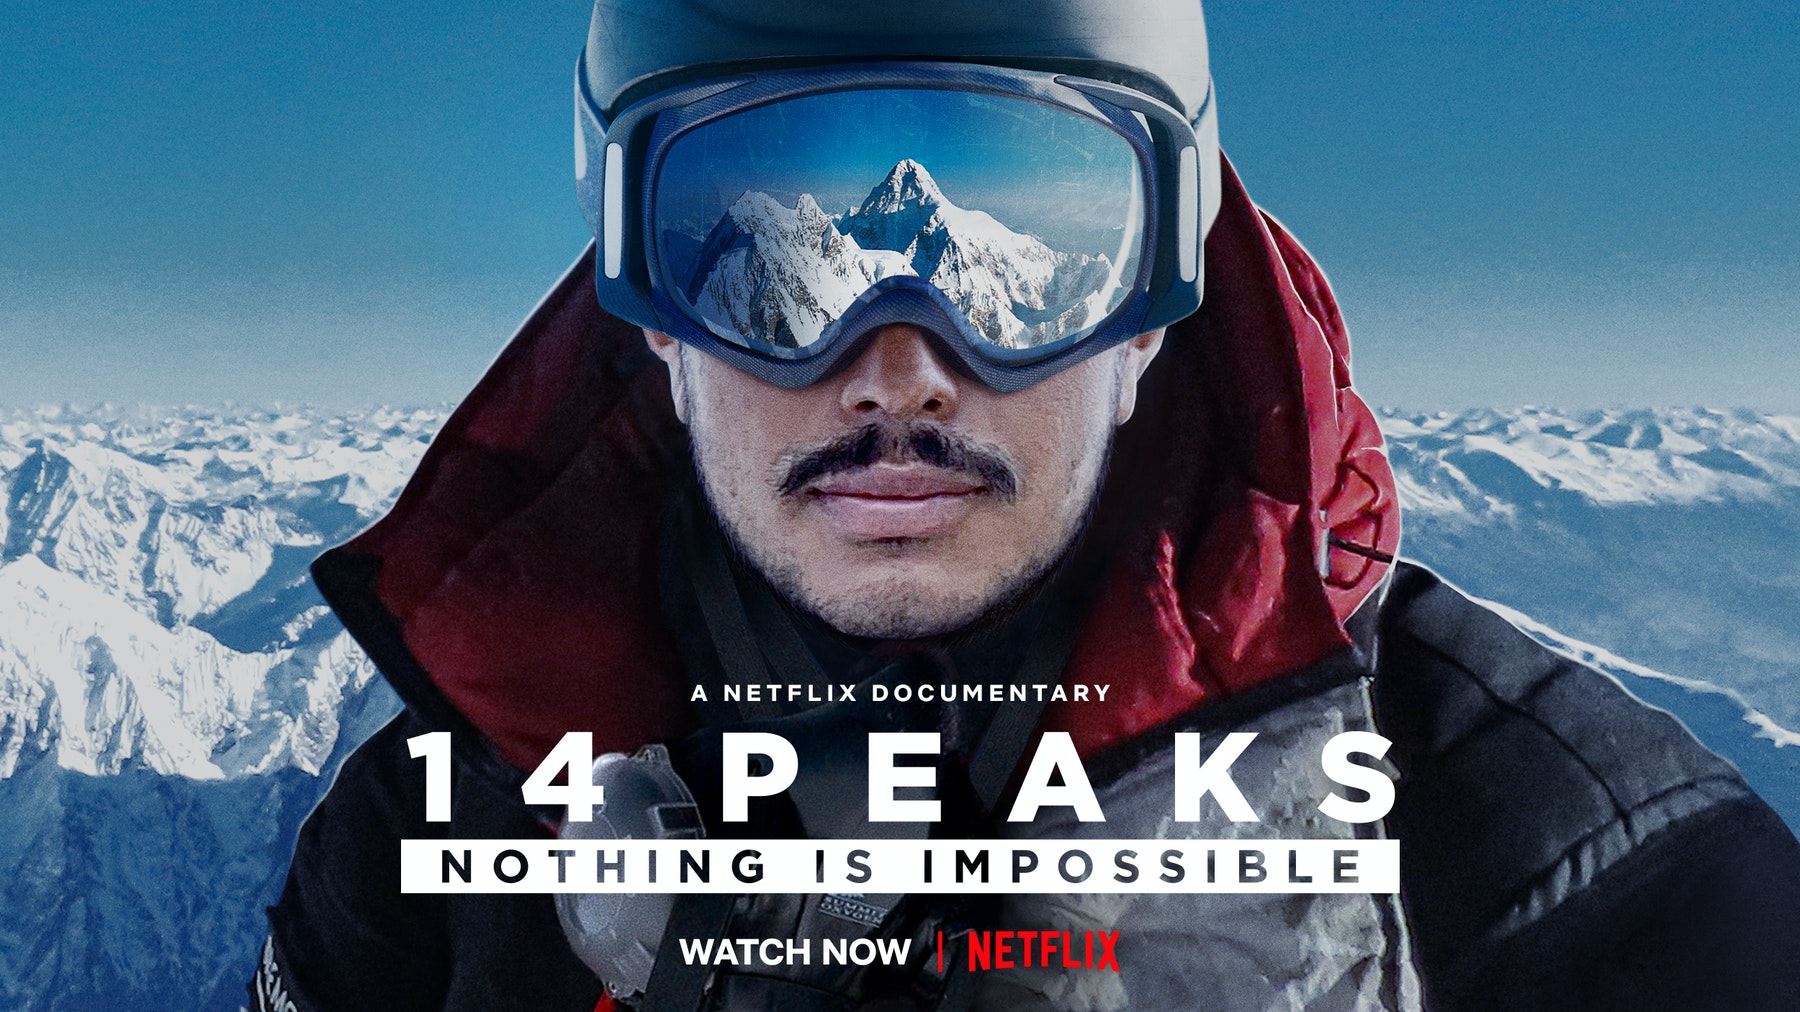 Nirmal Purja has gained international acclaim for his Netflix documentary ’14 Peaks: Nothing is Impossible’